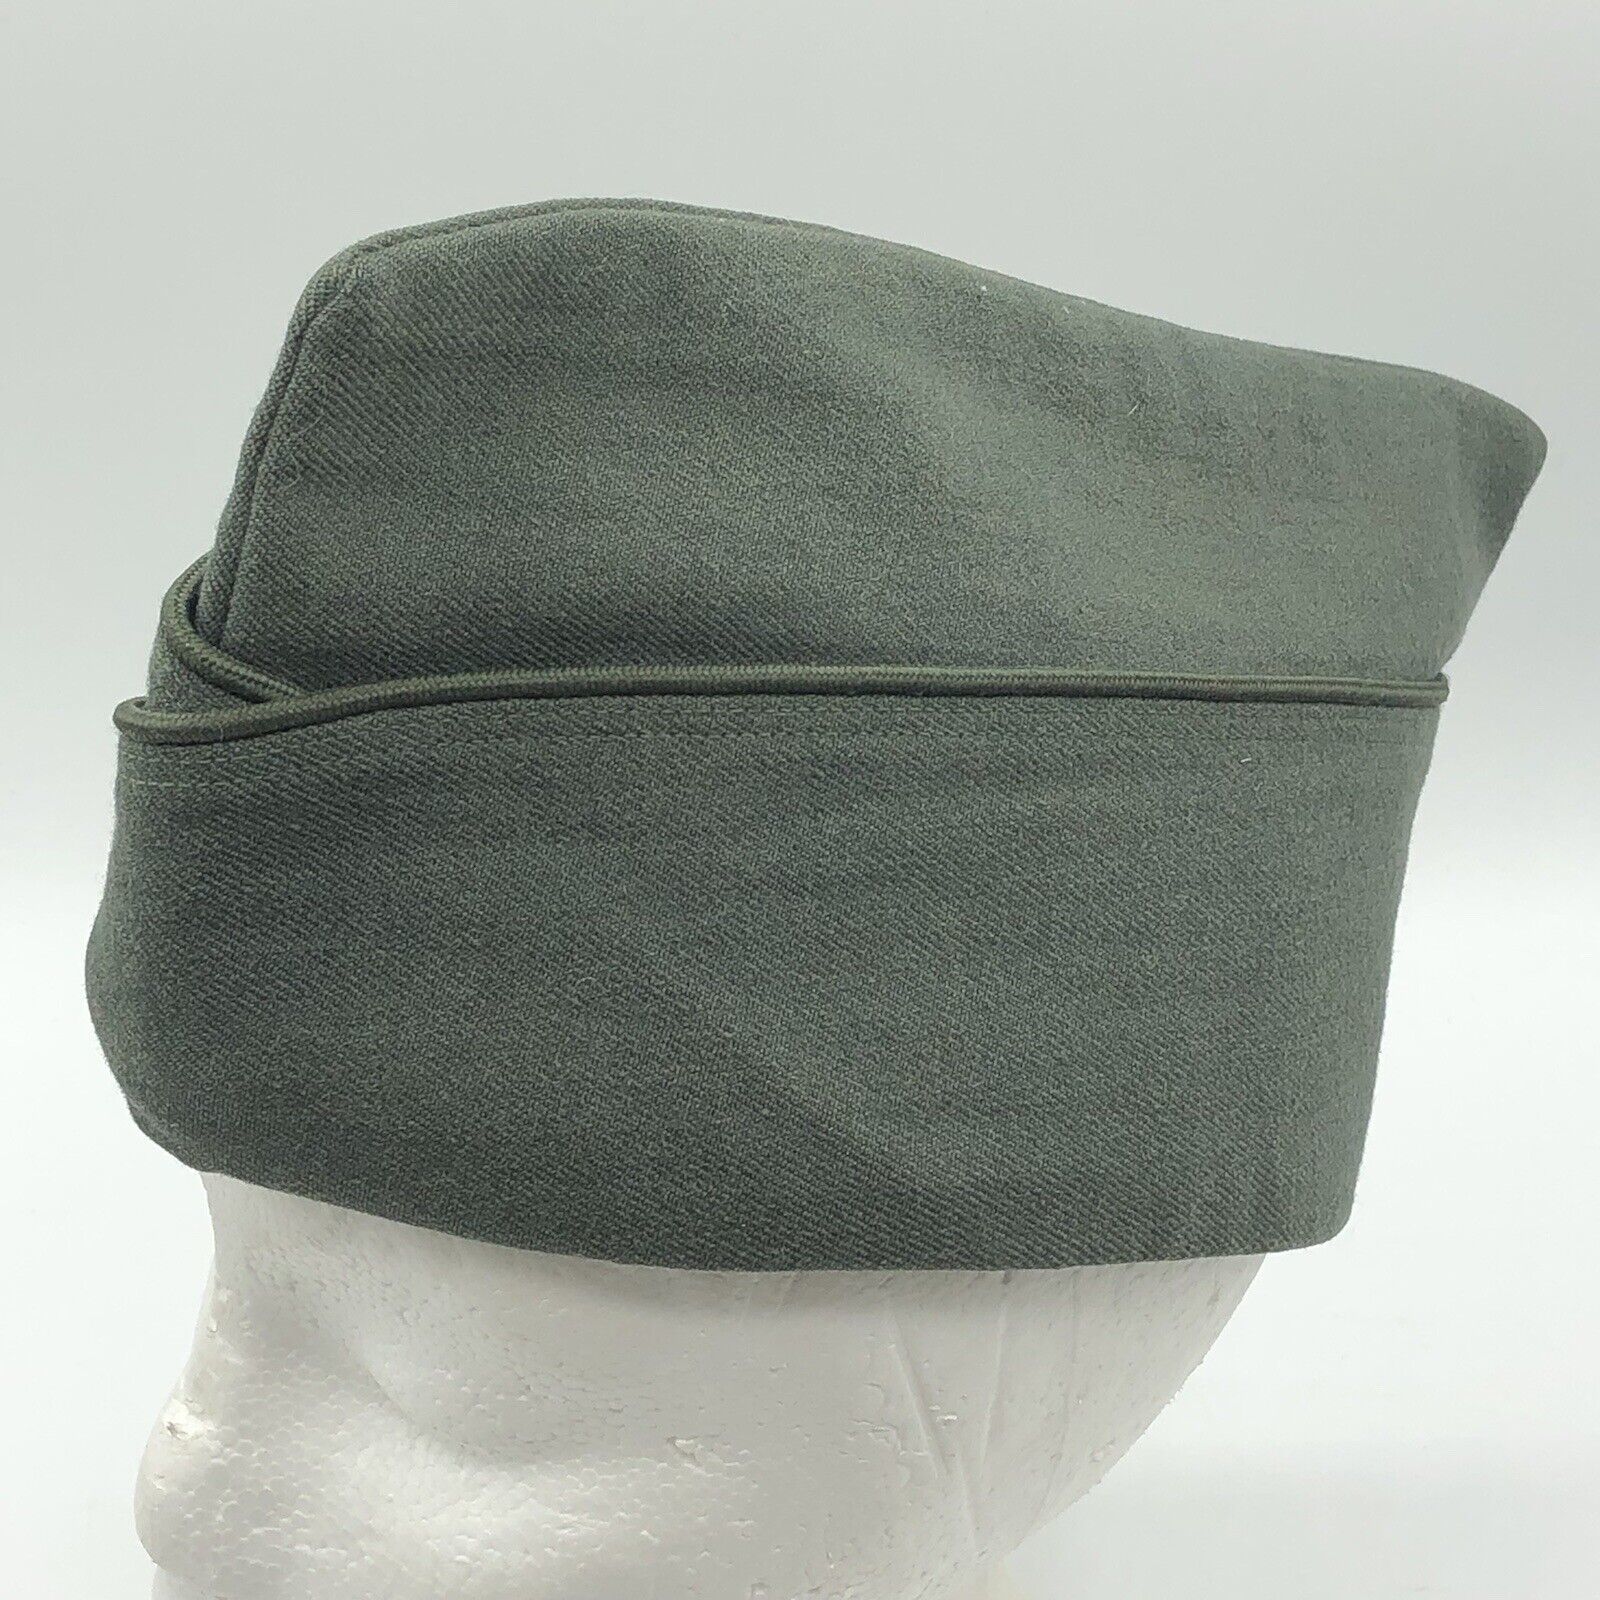 Primary image for Vintage US Army Green 44 Wool Garrison Military Cap Gerber 1958 Size 6 7/8 